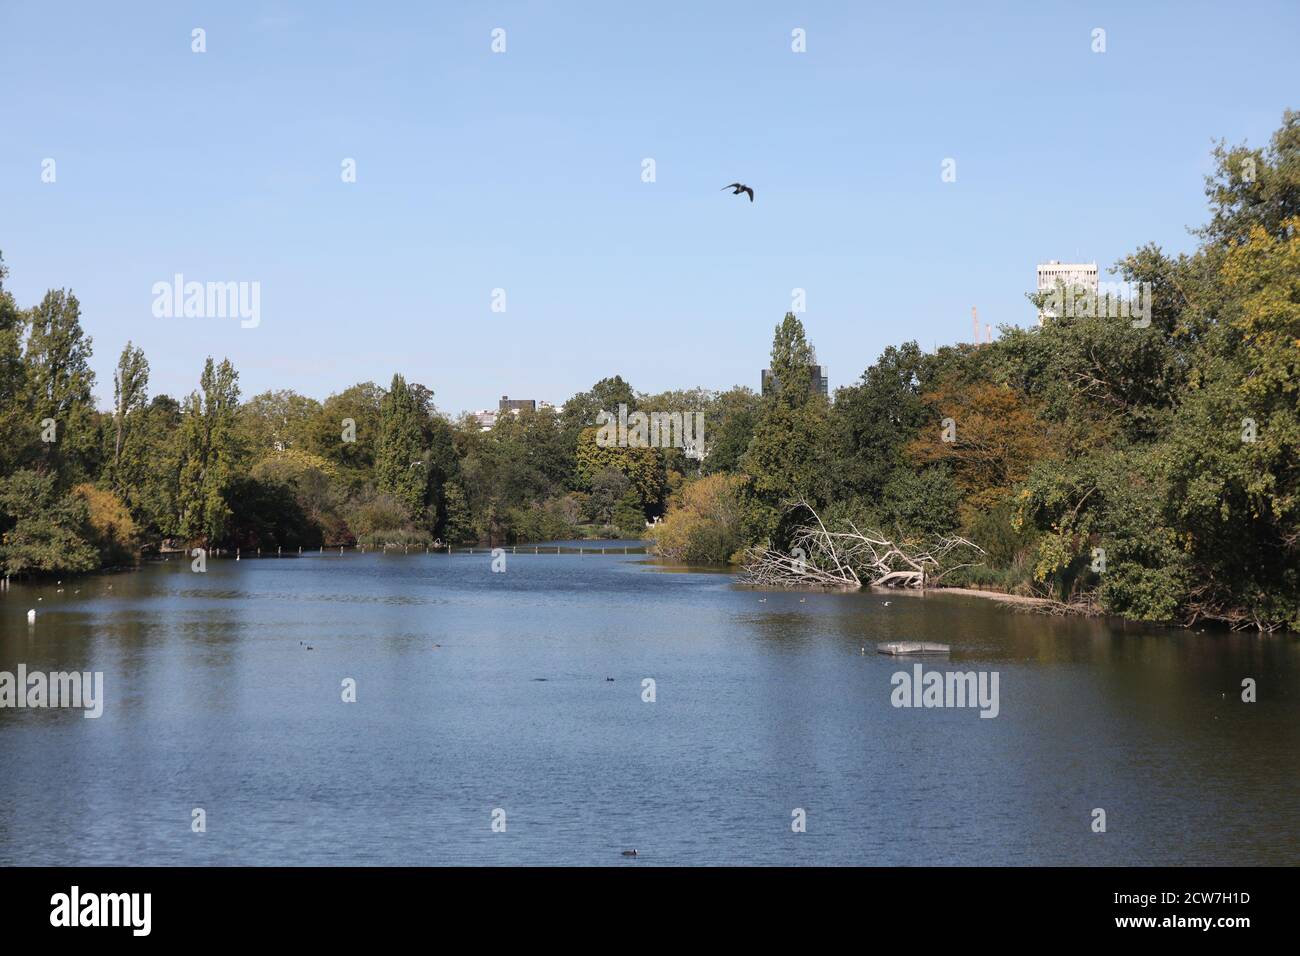 RETRANSMITTING AMENDING LOCATION A view over the Serpentine lake in Hyde Park, London. Stock Photo